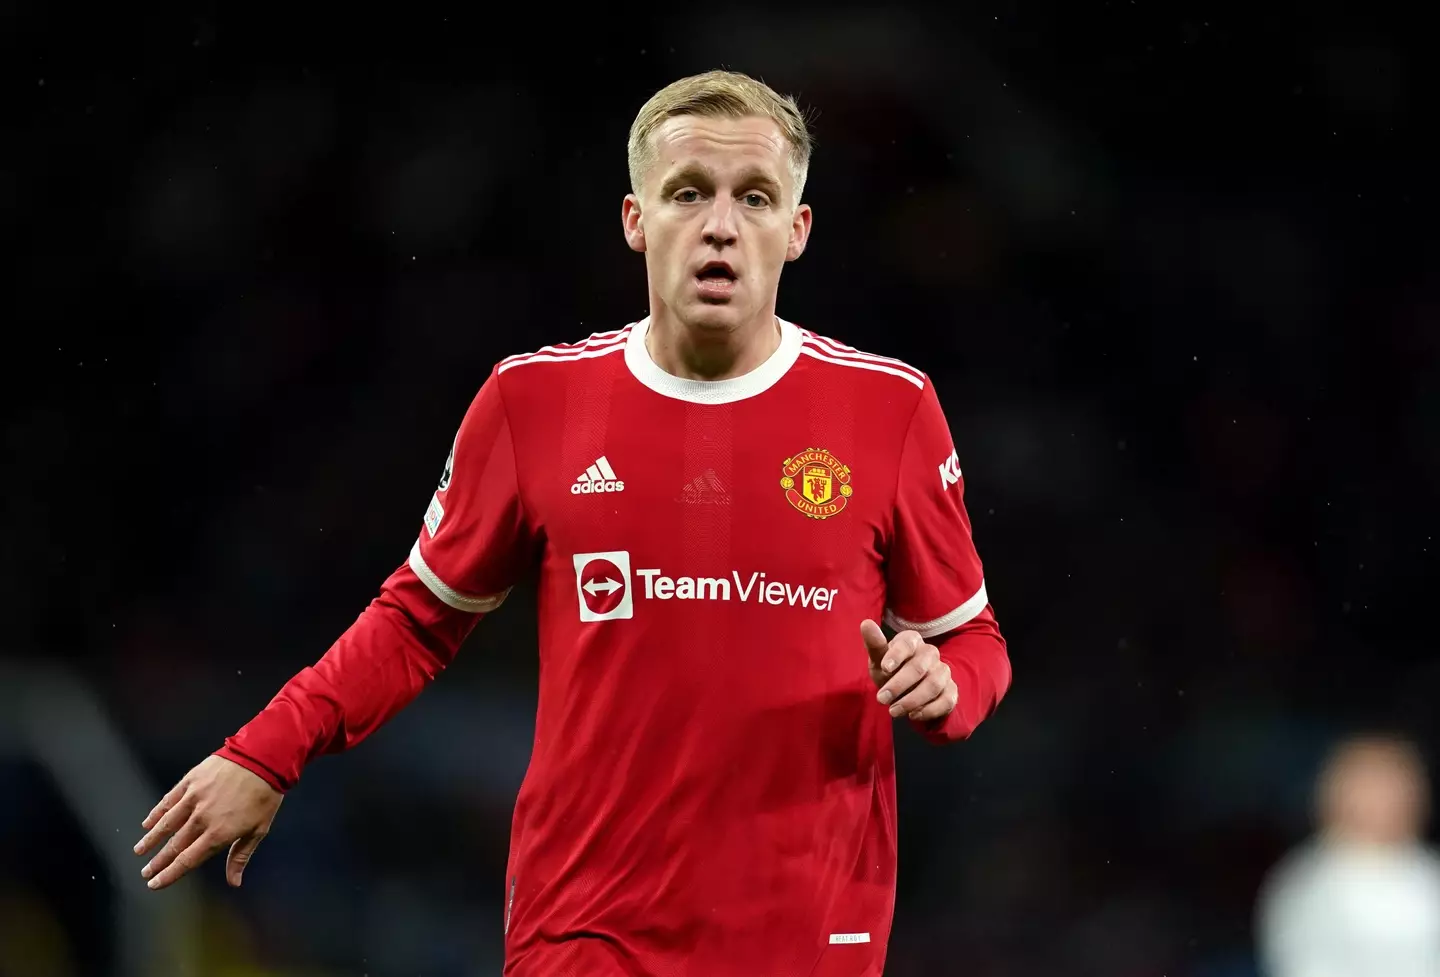 Van de Beek has been linked with Crystal Palace. Image: PA Images